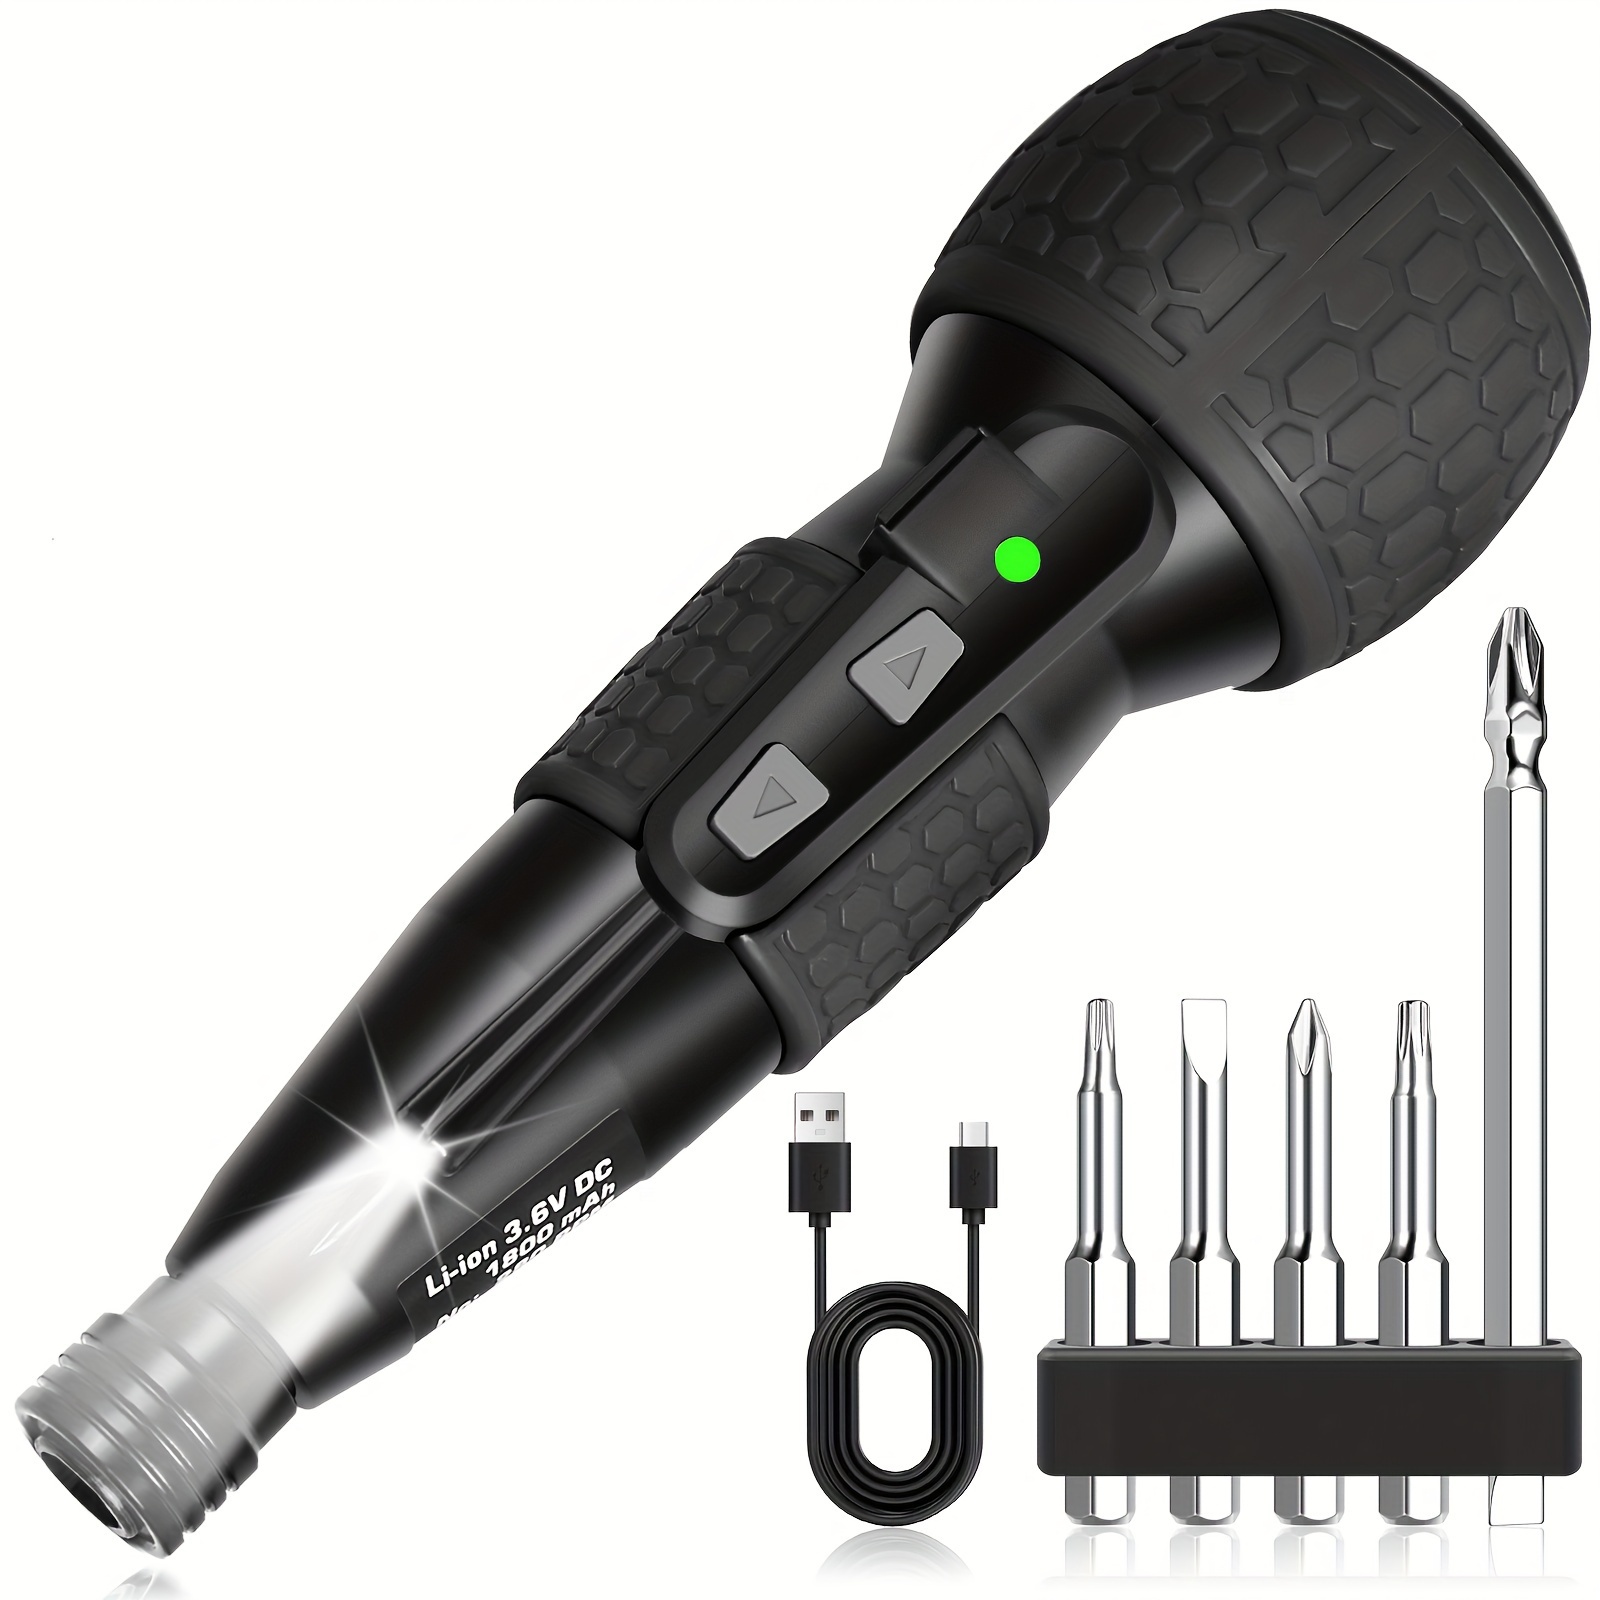 

Electric Screwdriver Kit, Power Screw Driver Cordless Rechargeable With Led Work Light, 5 Pieces Screwdriver Bits, Flex Hex Shaft, Bit Holders And Storage Bag